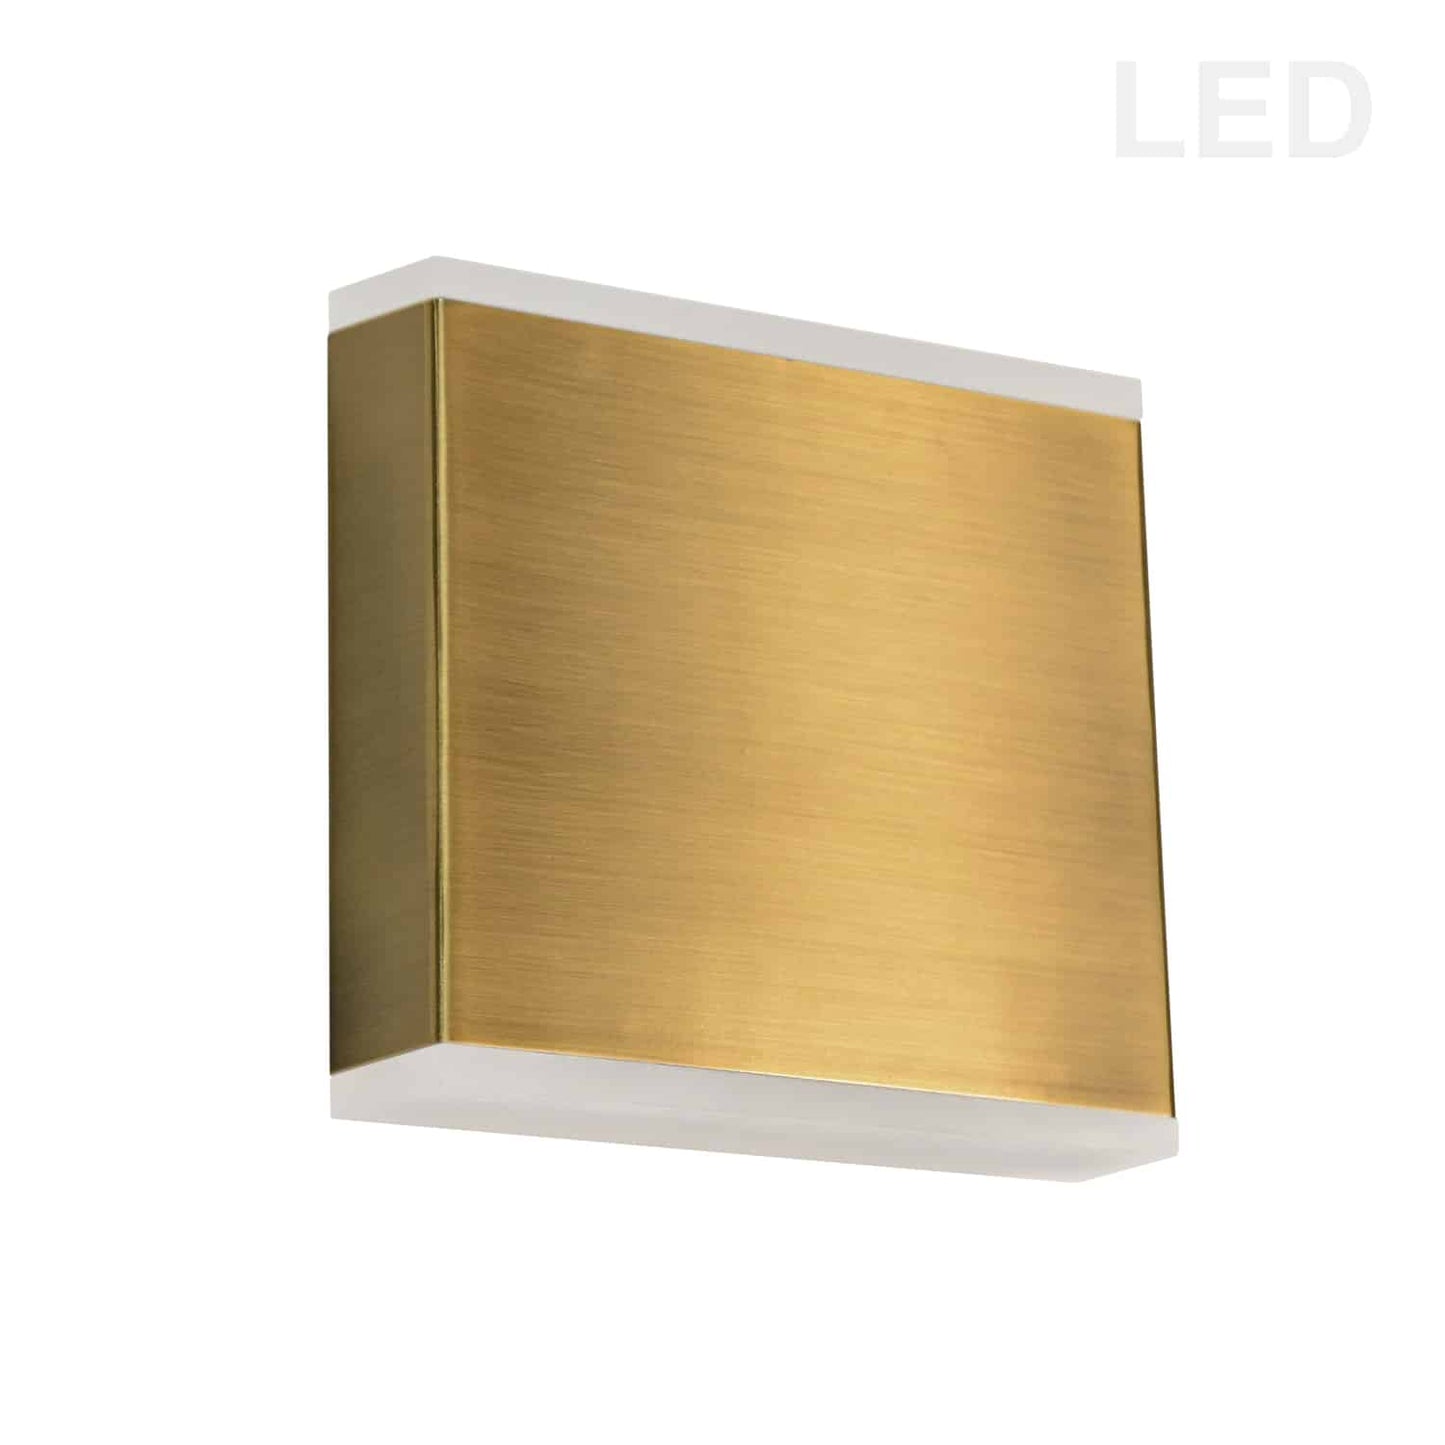 Dainolite EMY-550-5W-AGB 15W LED Wall Sconce, Aged Brass with Frosted Acrylic Diffuser